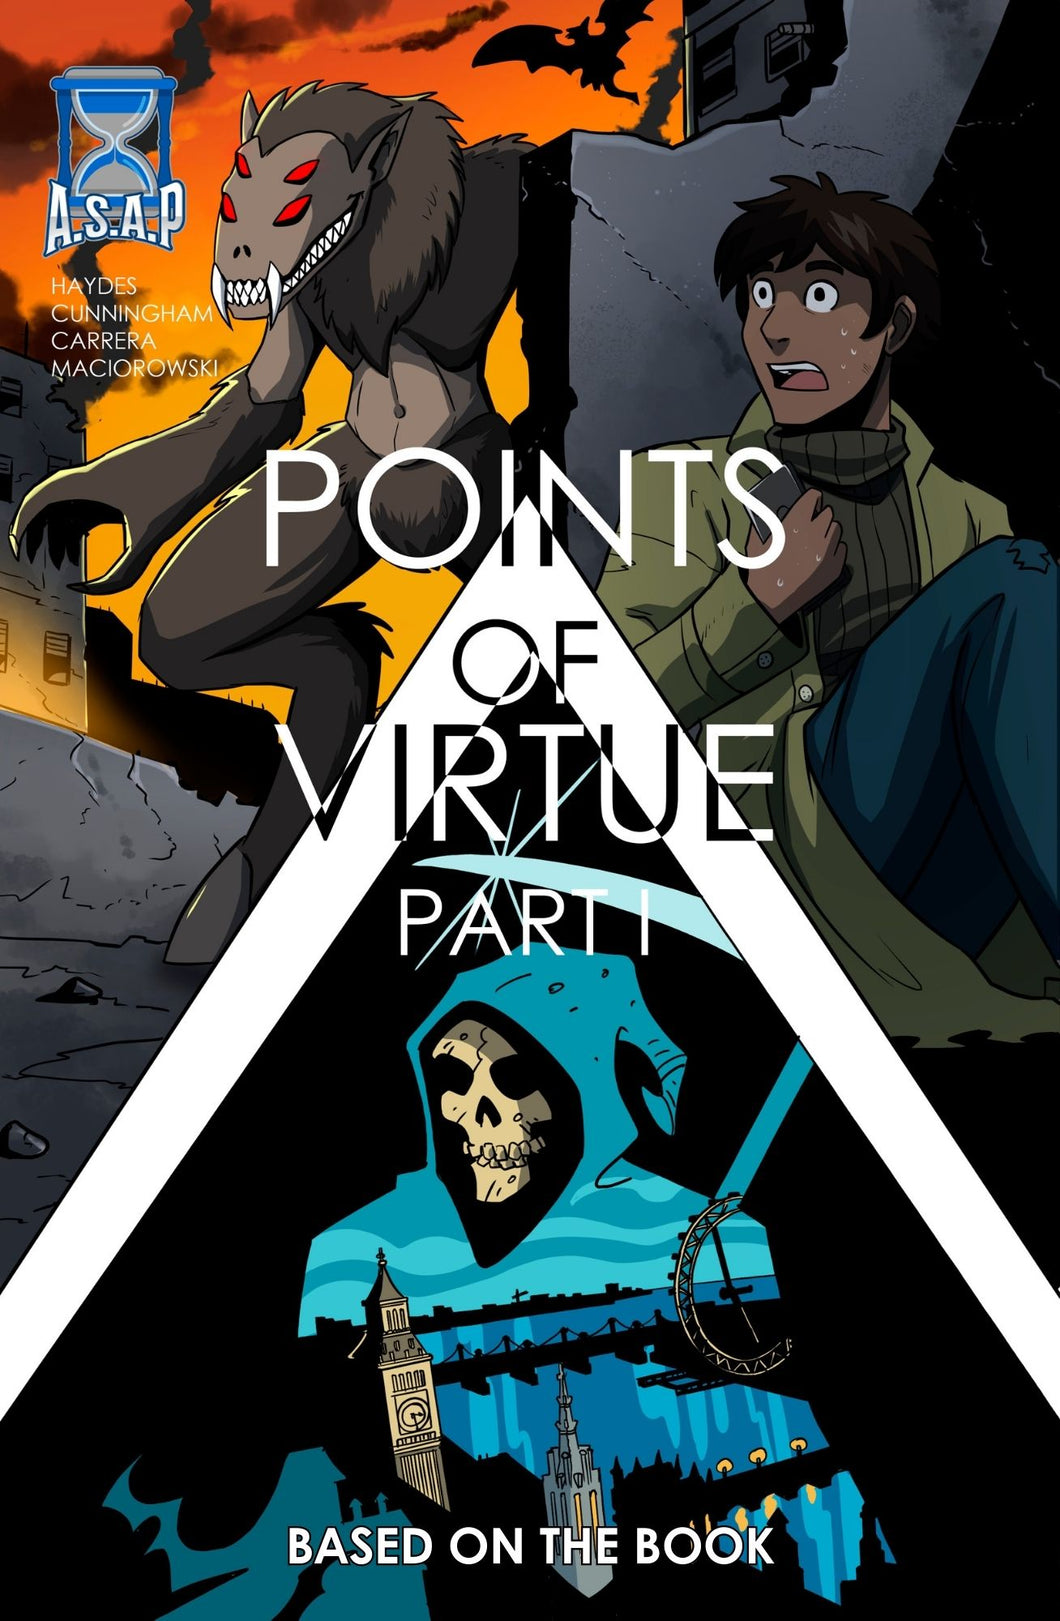 NOW AVAILABLE - Points of Virtue Part 1